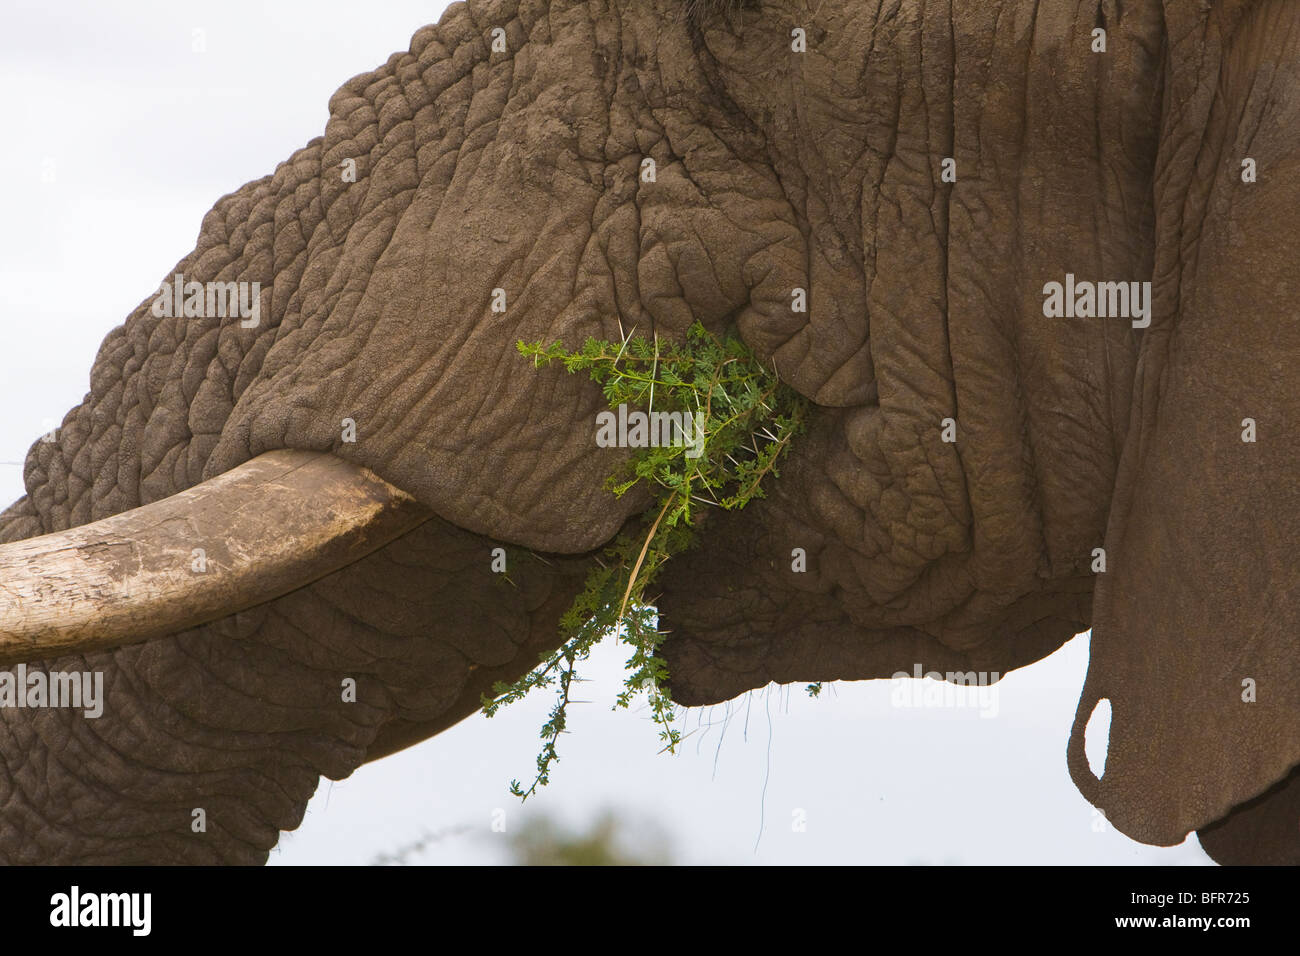 Close-up of Elephant feeding on thorn branches Stock Photo